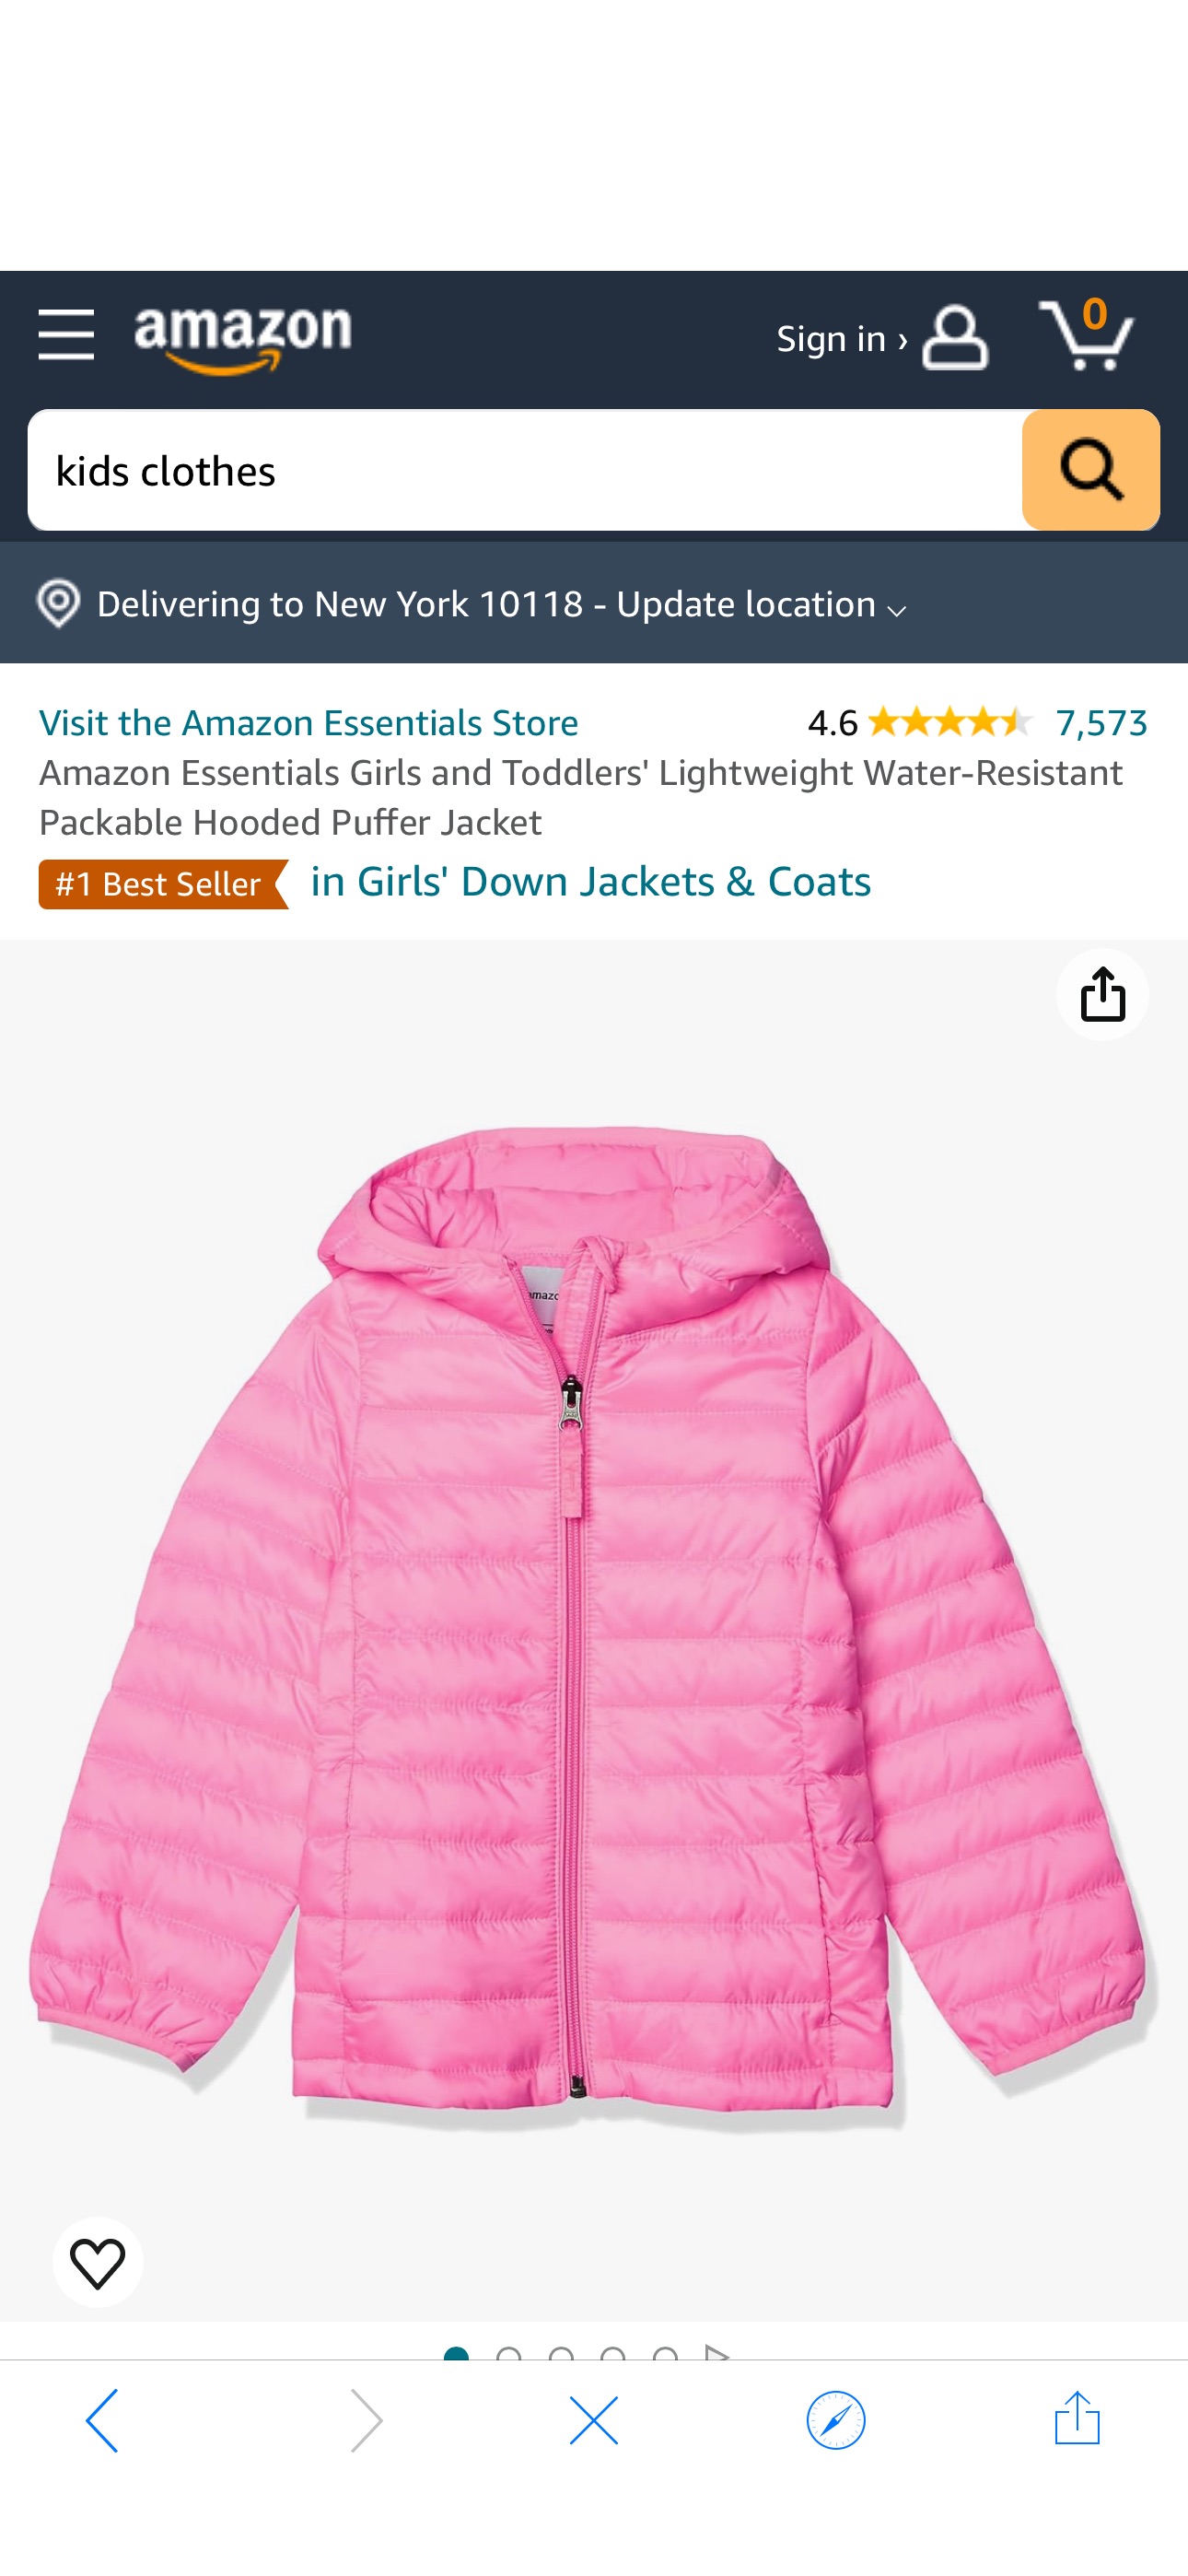 Amazon.com: Amazon Essentials Girls' Lightweight Water-Resistant Packable Hooded Puffer Jacket, Neon Pink, X-Small : Clothing, Shoes & Jewelry